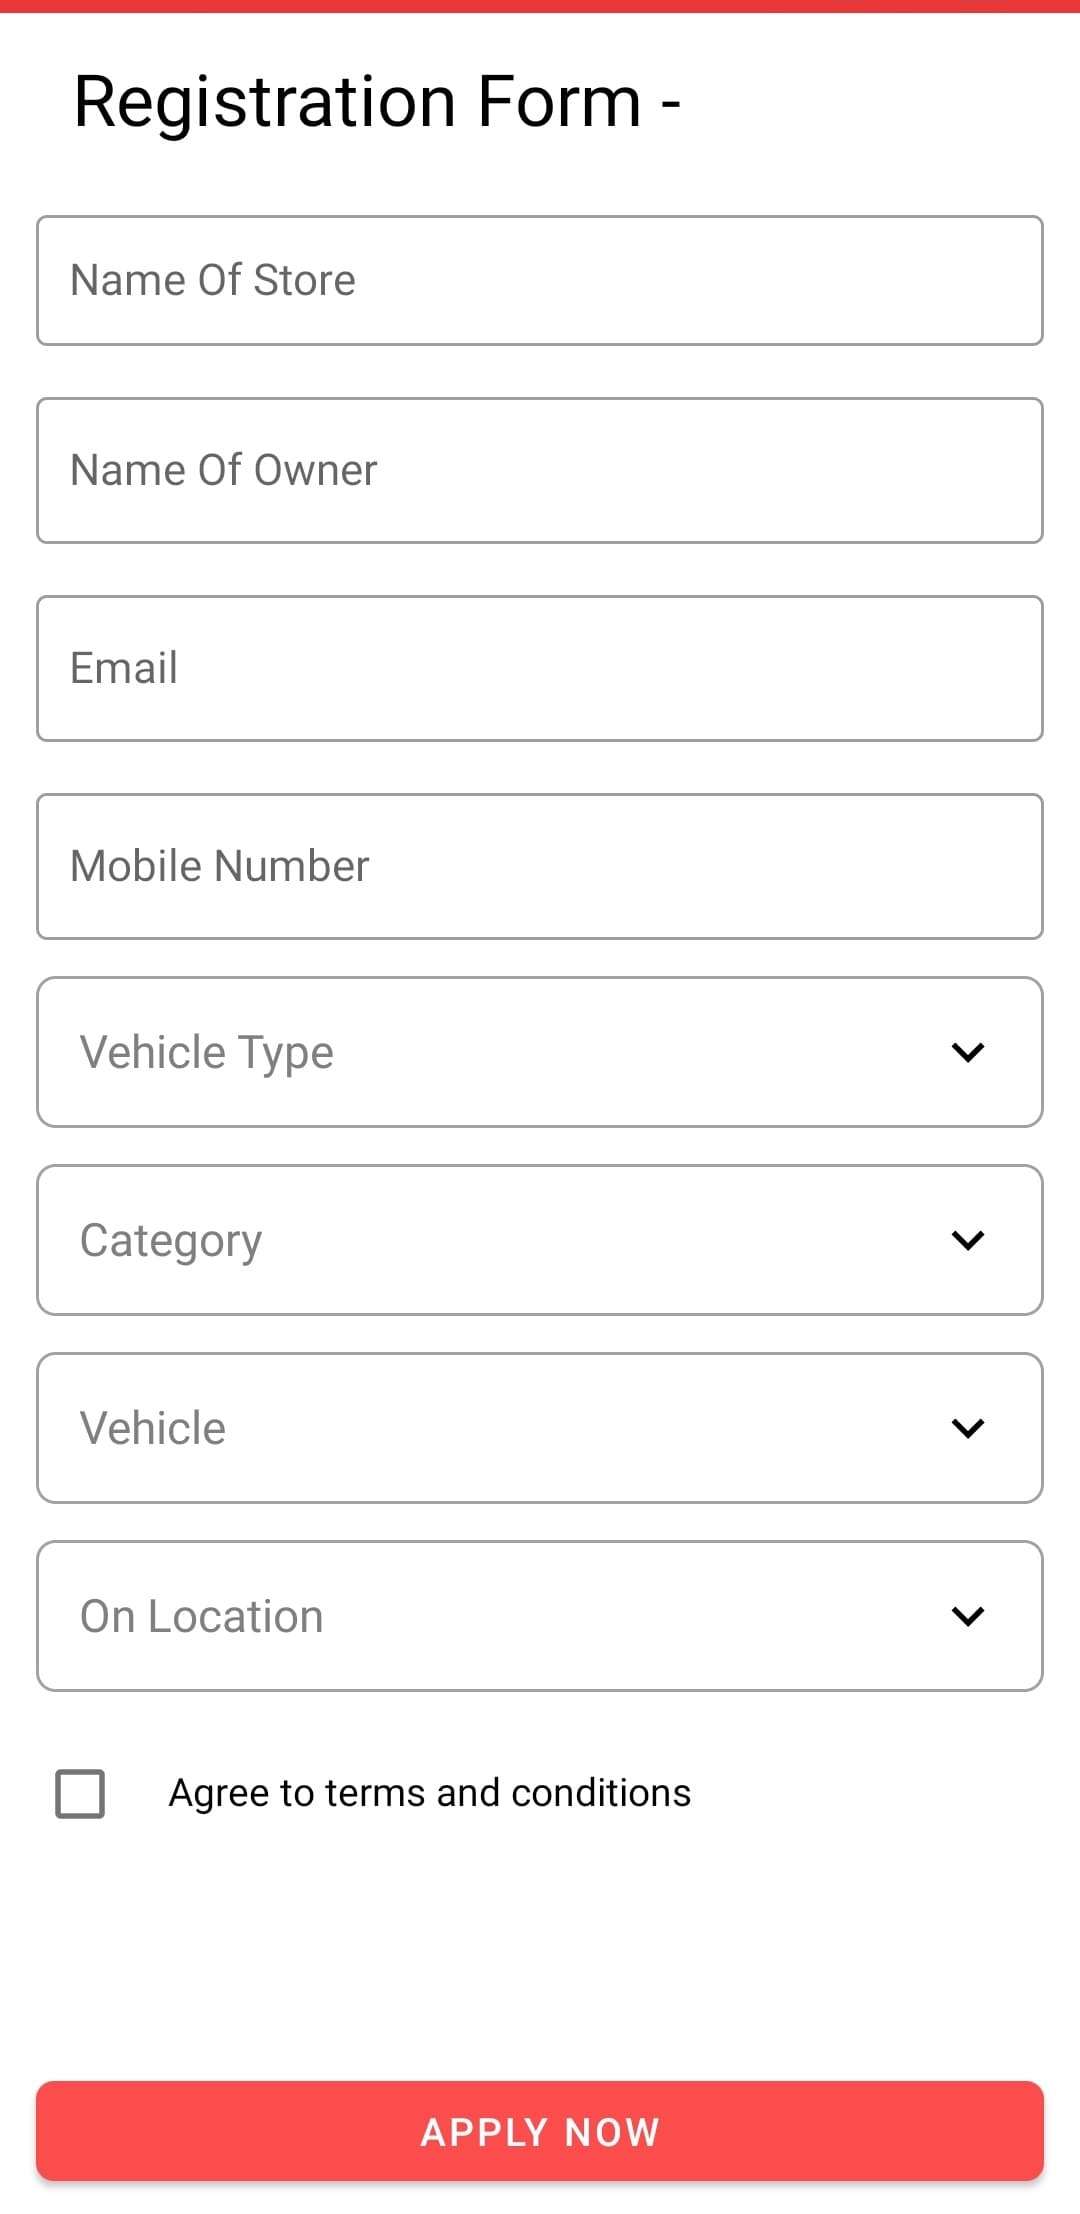 Registration Form -
Name Of Store
Name Of Owner
Email
Mobile Number
Vehicle Type
Category
Vehicle
On Location
Agree to terms and conditions
APPLY NOW
>
>
>
>
